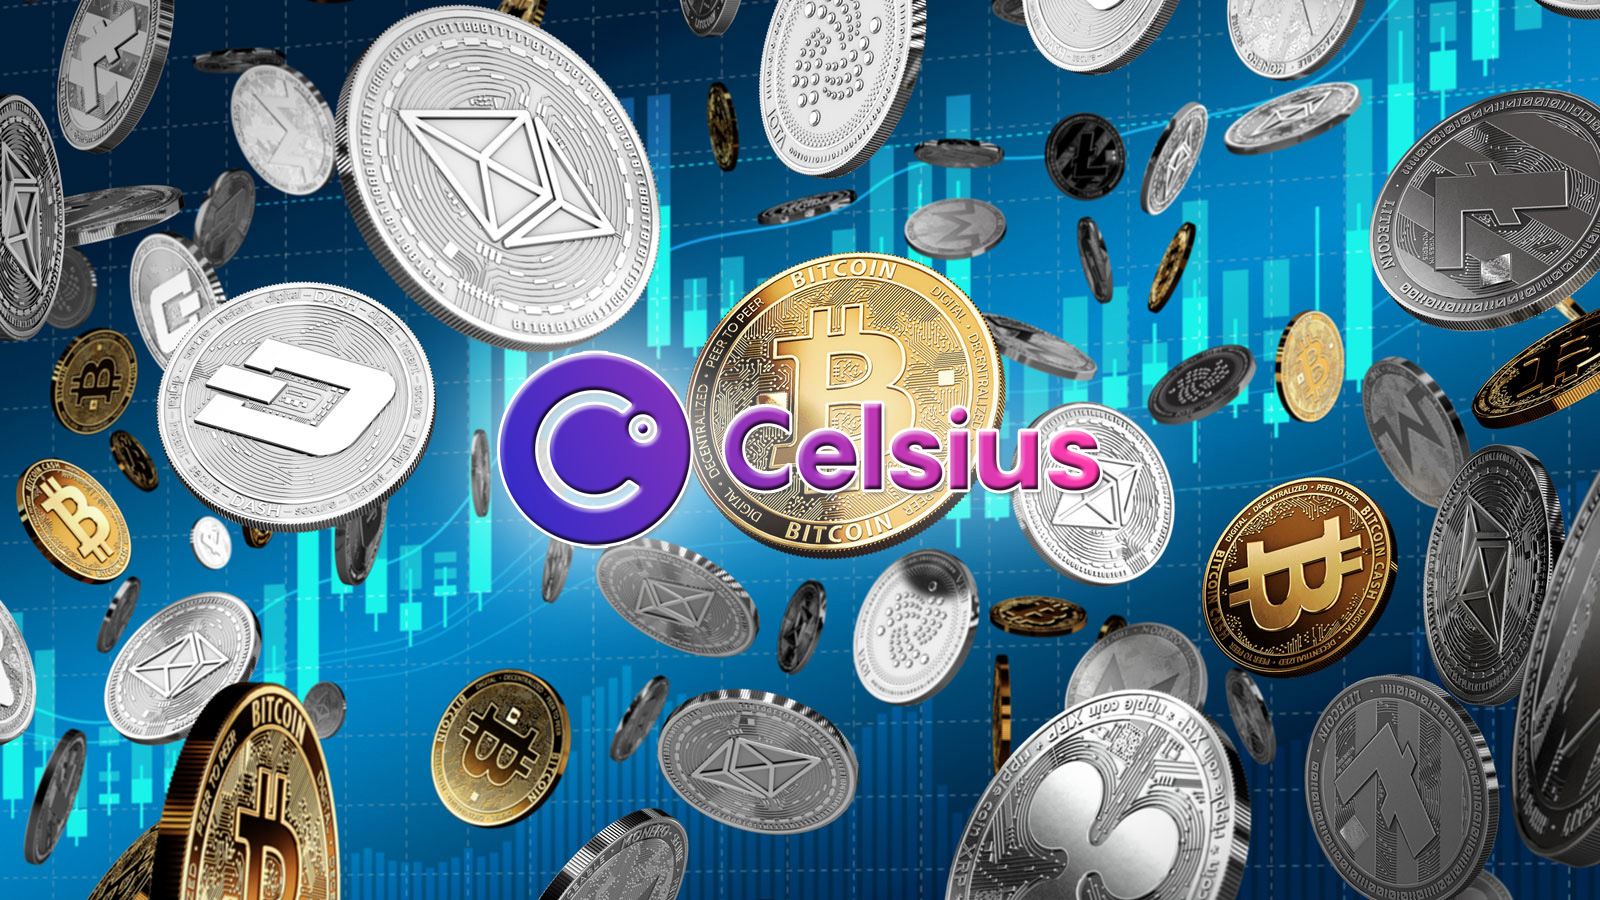 Celsius logo over cryptocurrency